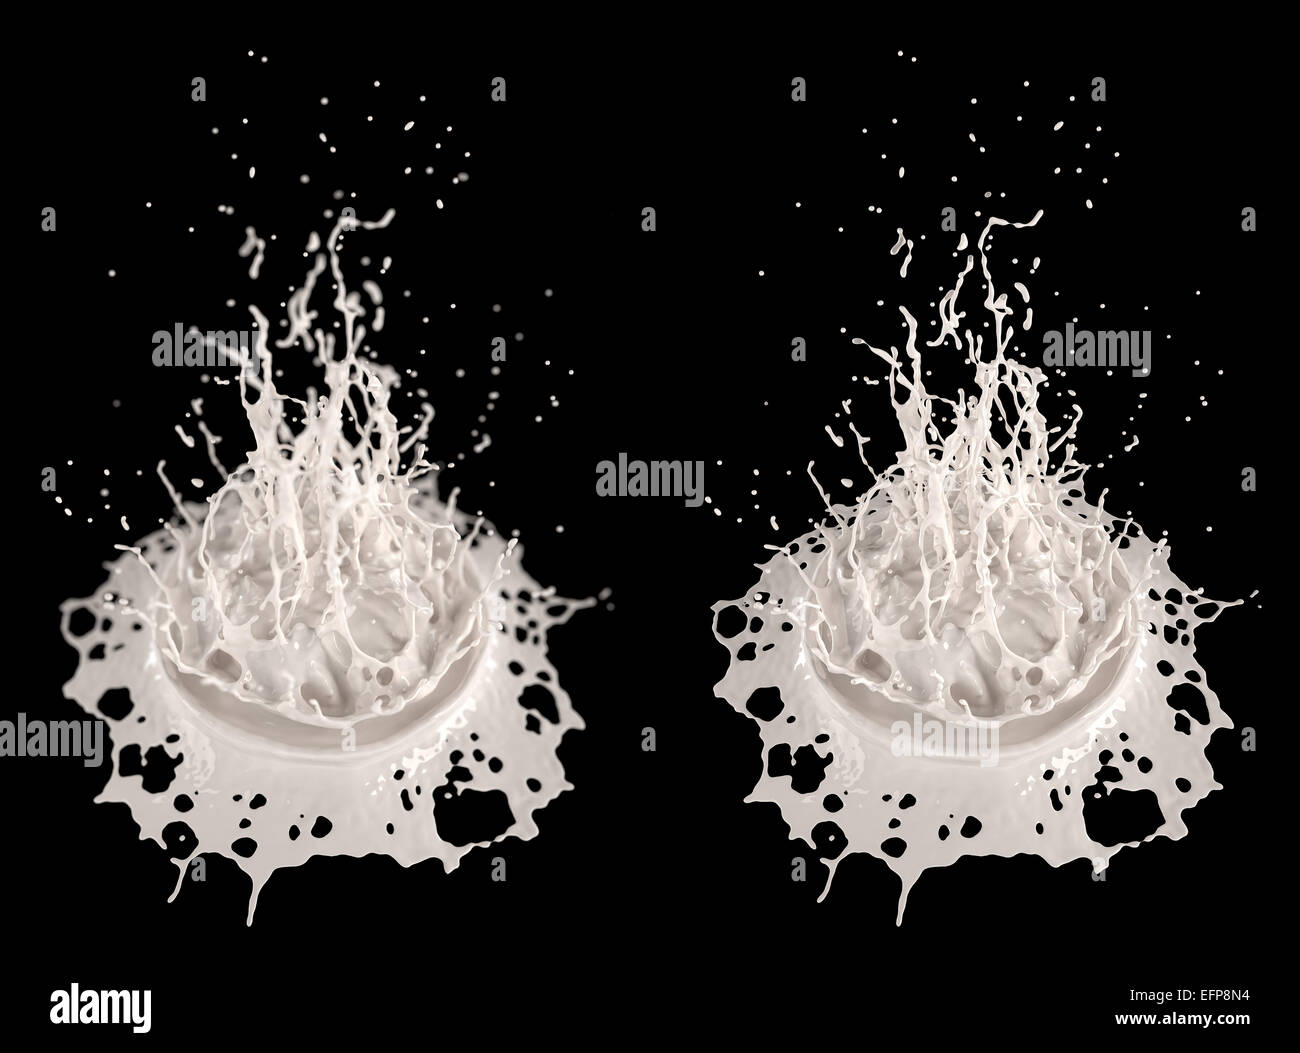 Splash - liquid splash (milk) - with and without Depth of Field effect Stock Photo